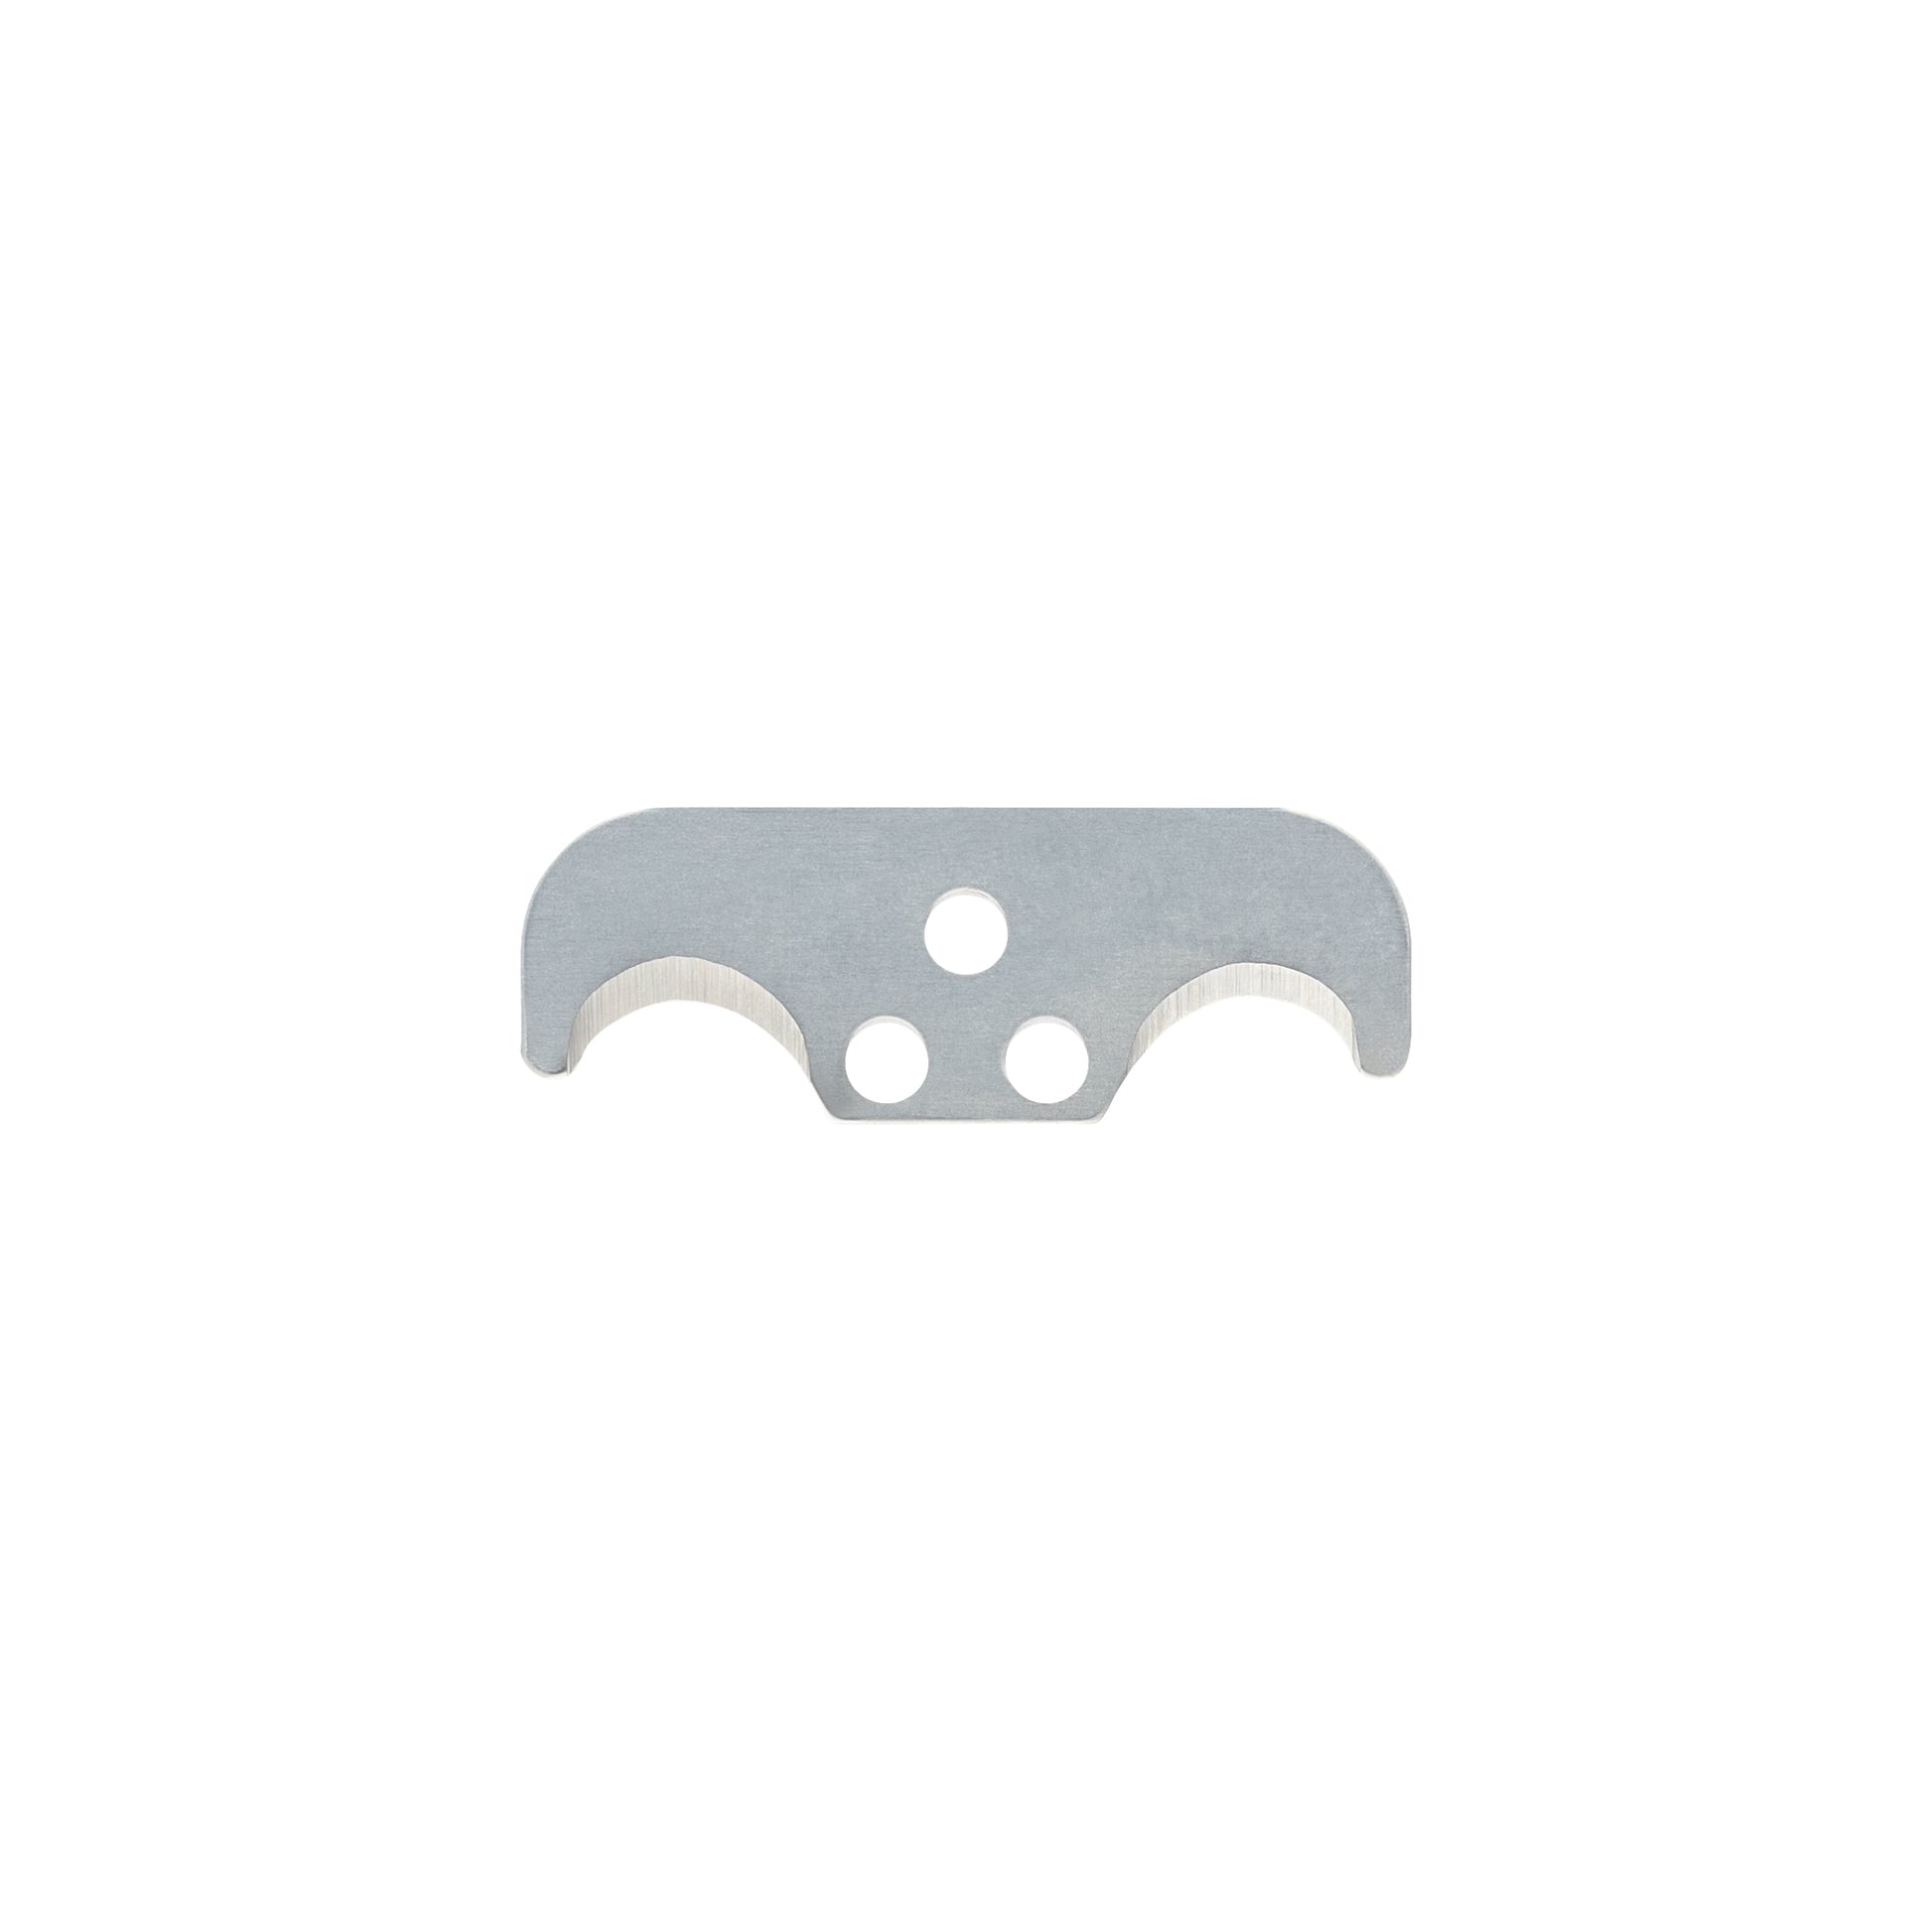 HS-8820SS Replacement Blade - Stainless for use with KS-101SS Safety Cutters (100 blades) - DaltonSafety